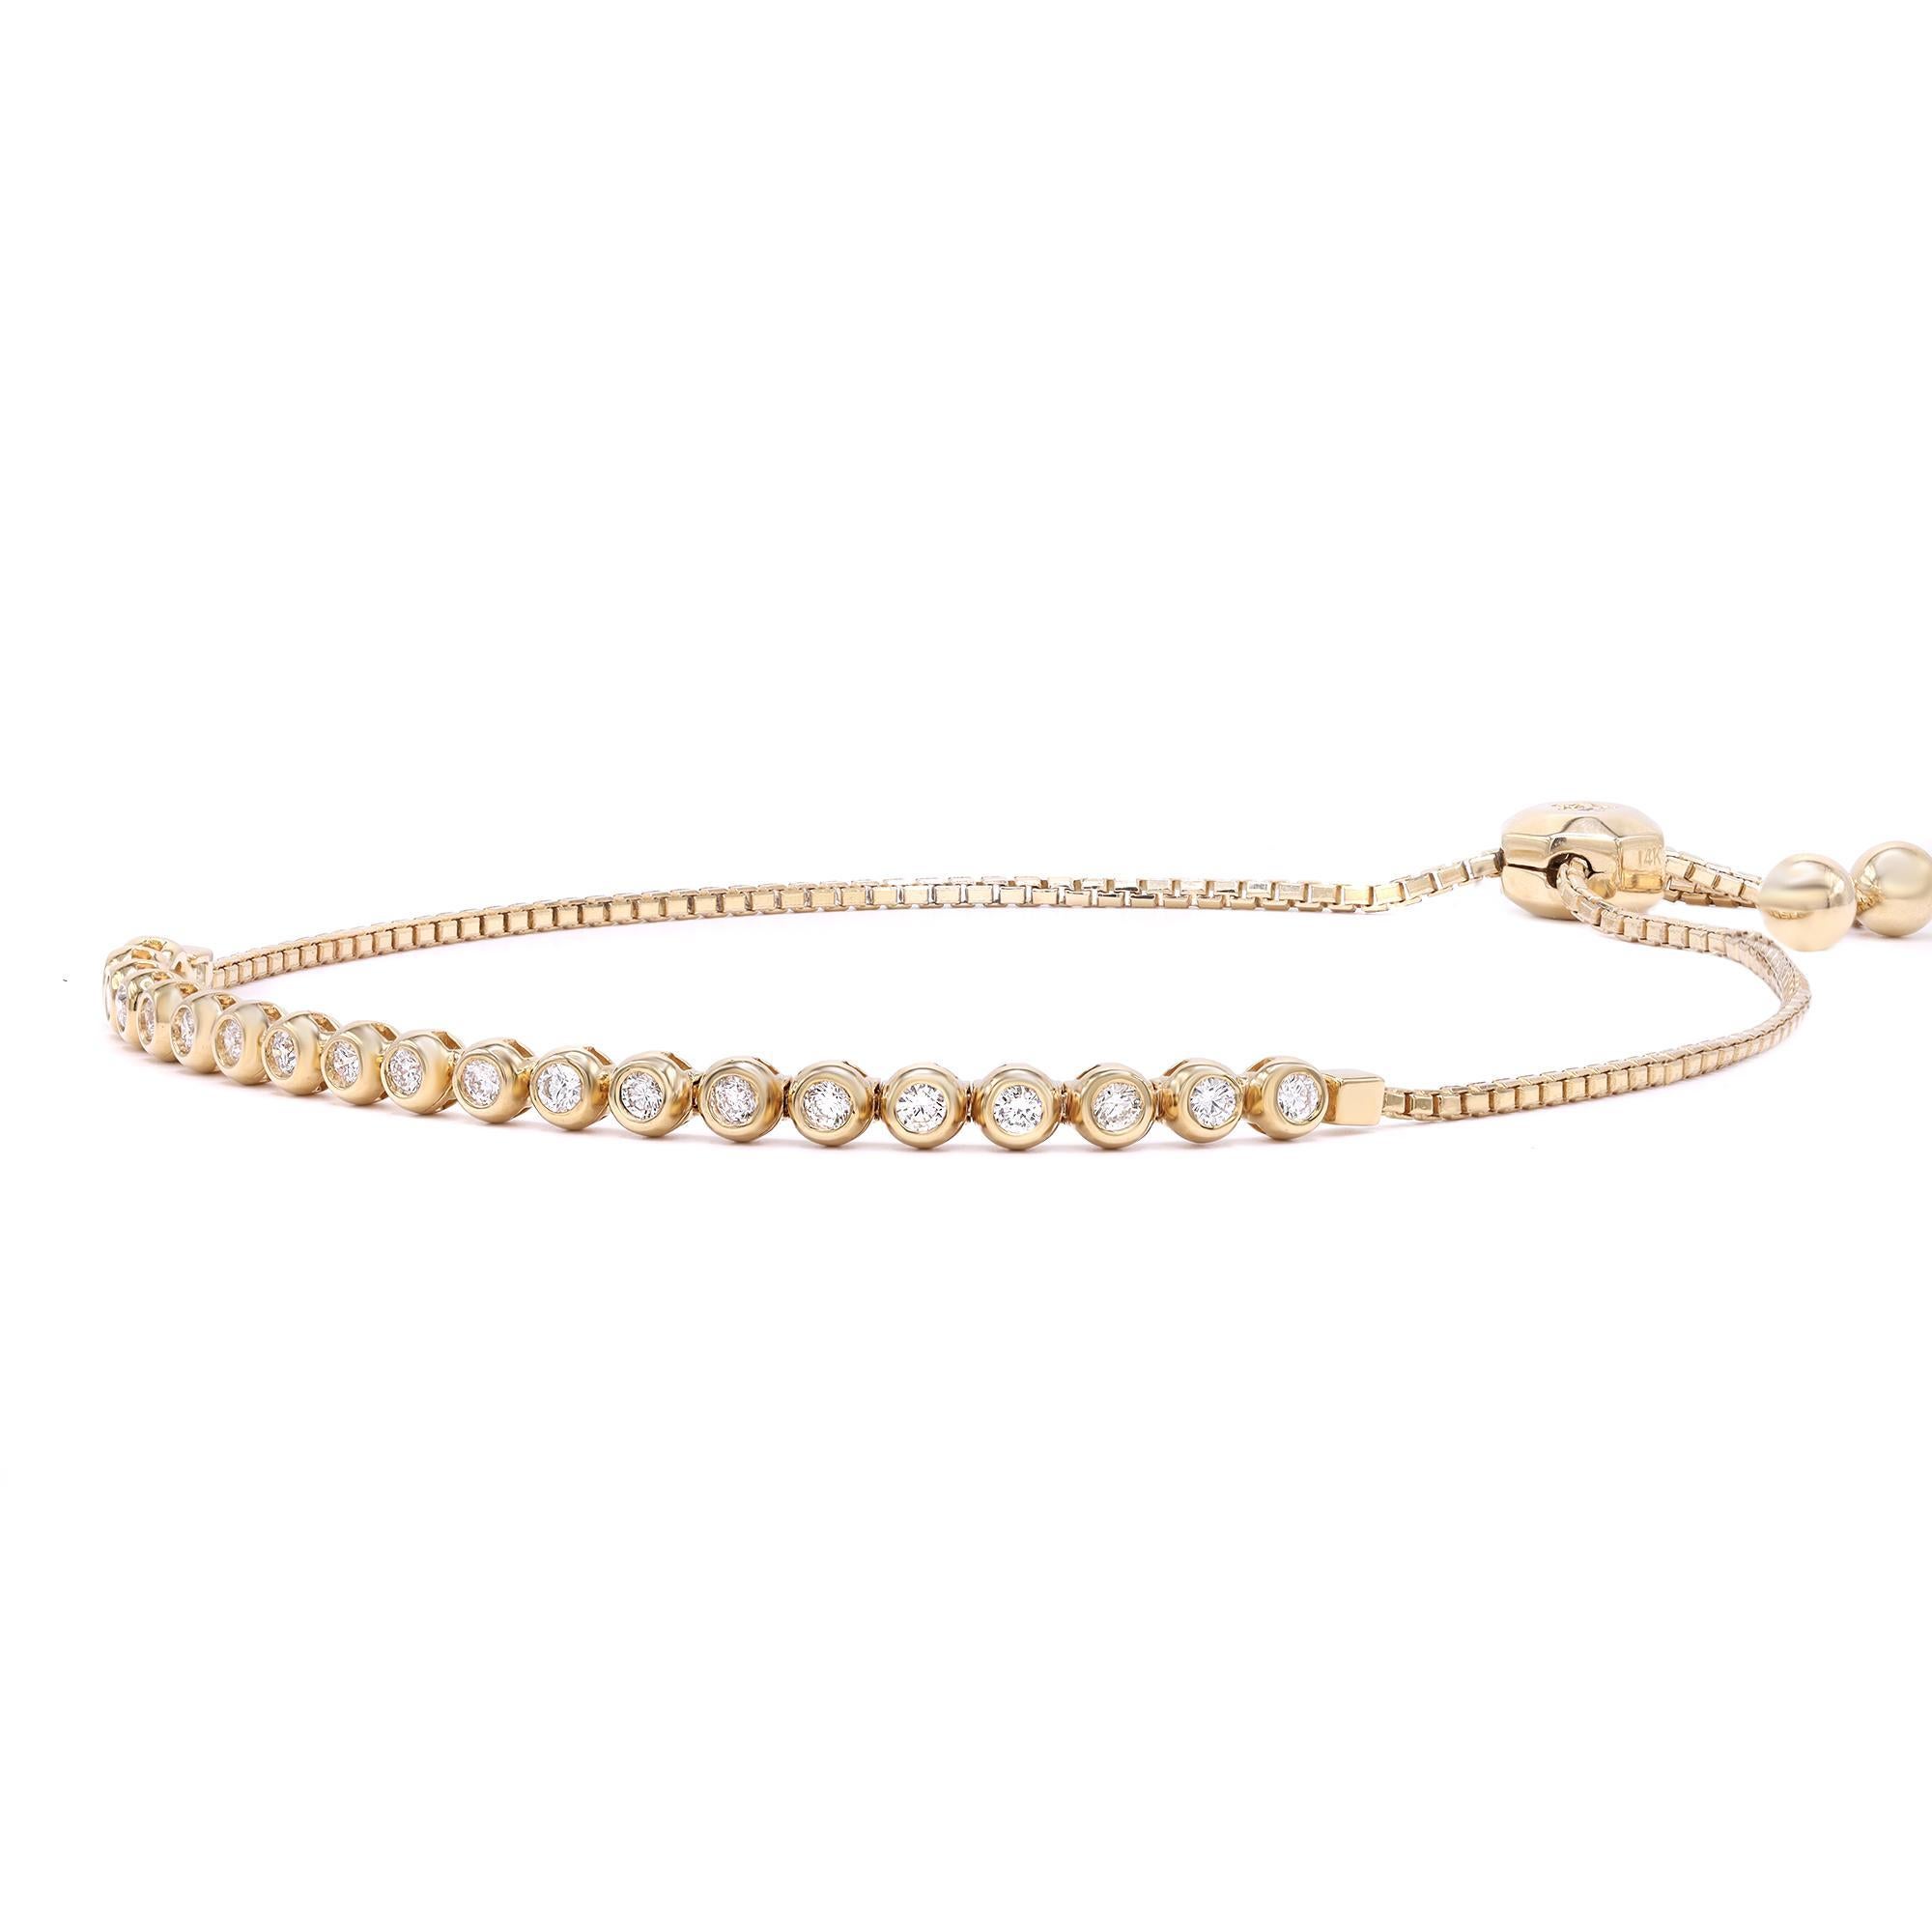 Trendy tennis bracelet with a sliding lariat closure on a delicate box chain. Super comfortable, so easy to wear! The design is shimmered with 22 bezel set round brilliant cut diamonds totaling 0.67 carats crafted in fine 14K Yellow Gold. Good